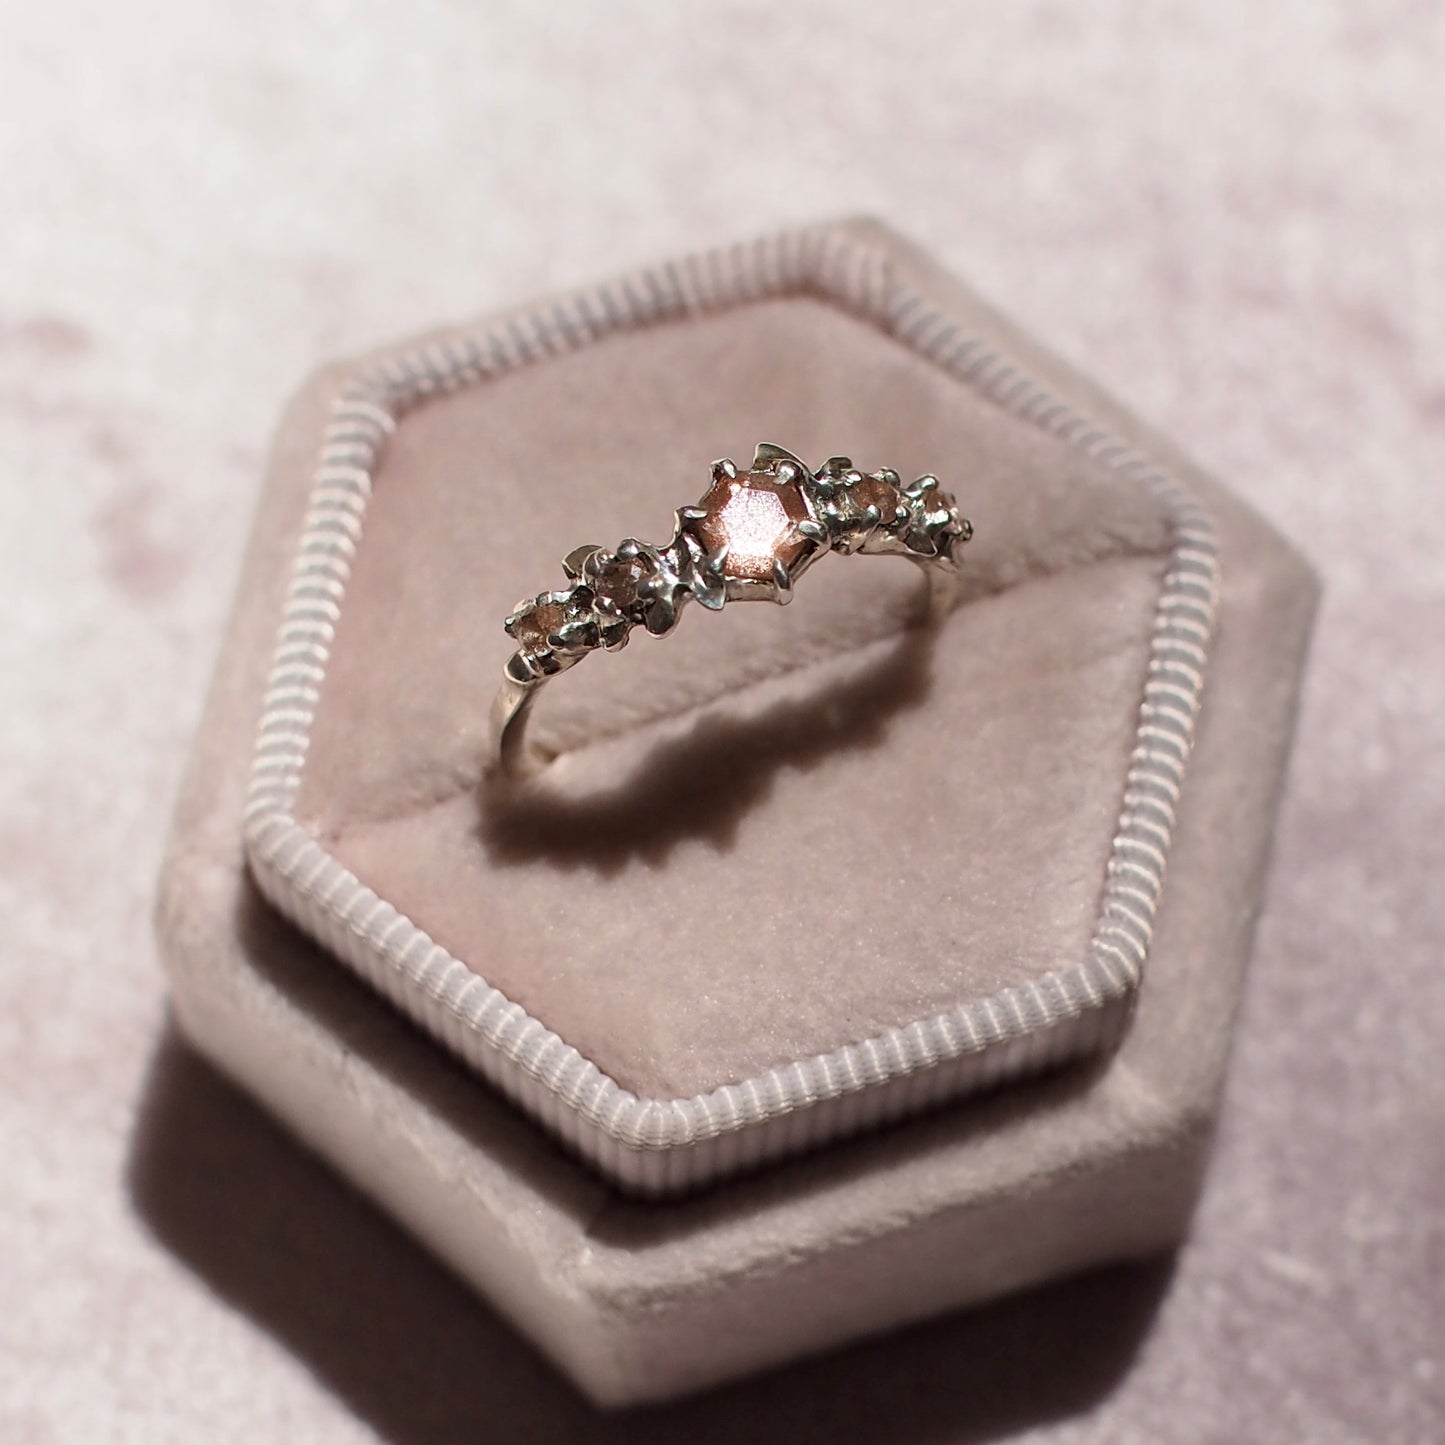 Sunstone Flower Crown Ring - One of a Kind